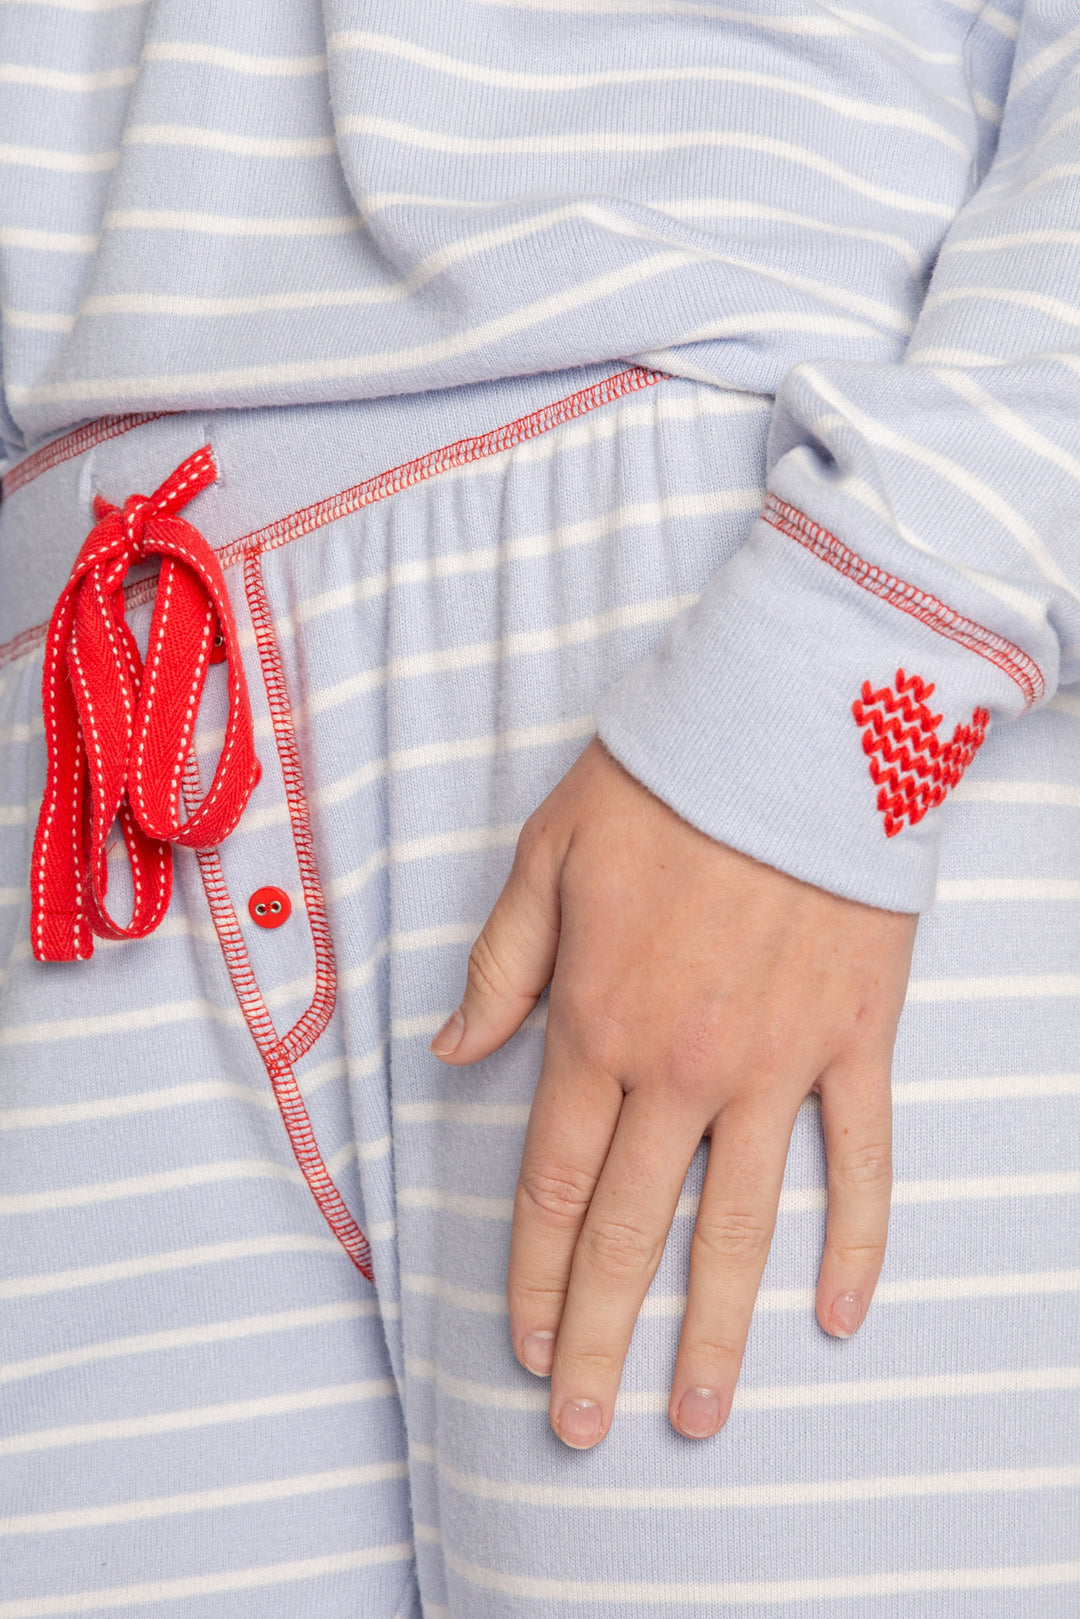 PJ set in blue-white striped knit, red stitching & heart embroidery at sleeve & pant cuffs. Red ties. (7257680314468)